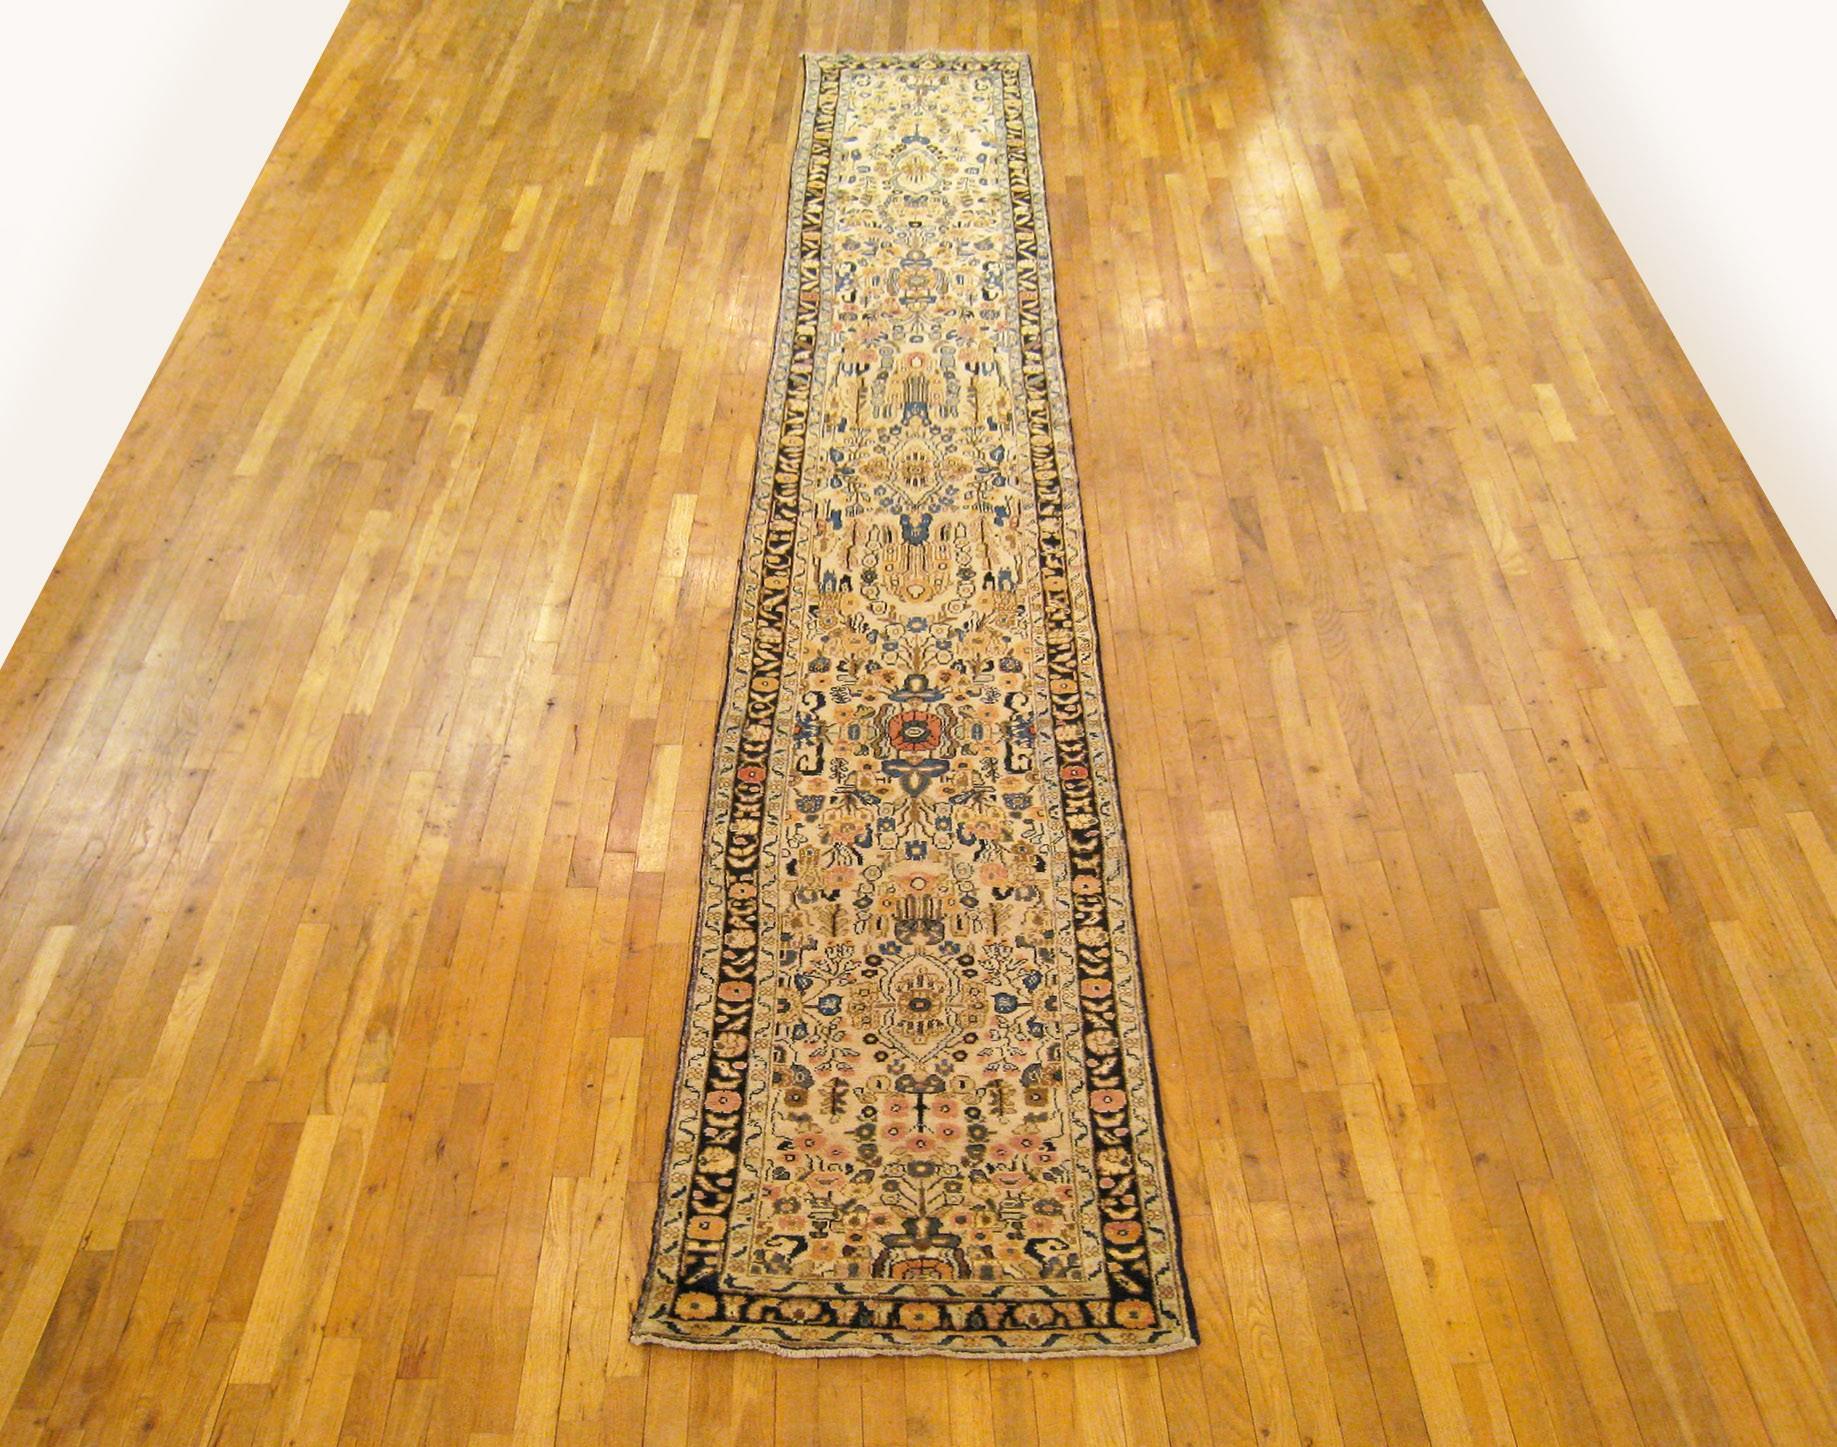 A vintage Persian Hamadan Oriental rug in runner size, size 16'6 x 2'6, circa 1930. This lovely hand knotted carpet features a dazzling floral design in the ivory central field, alternating between small scale and large scale floral elements. The